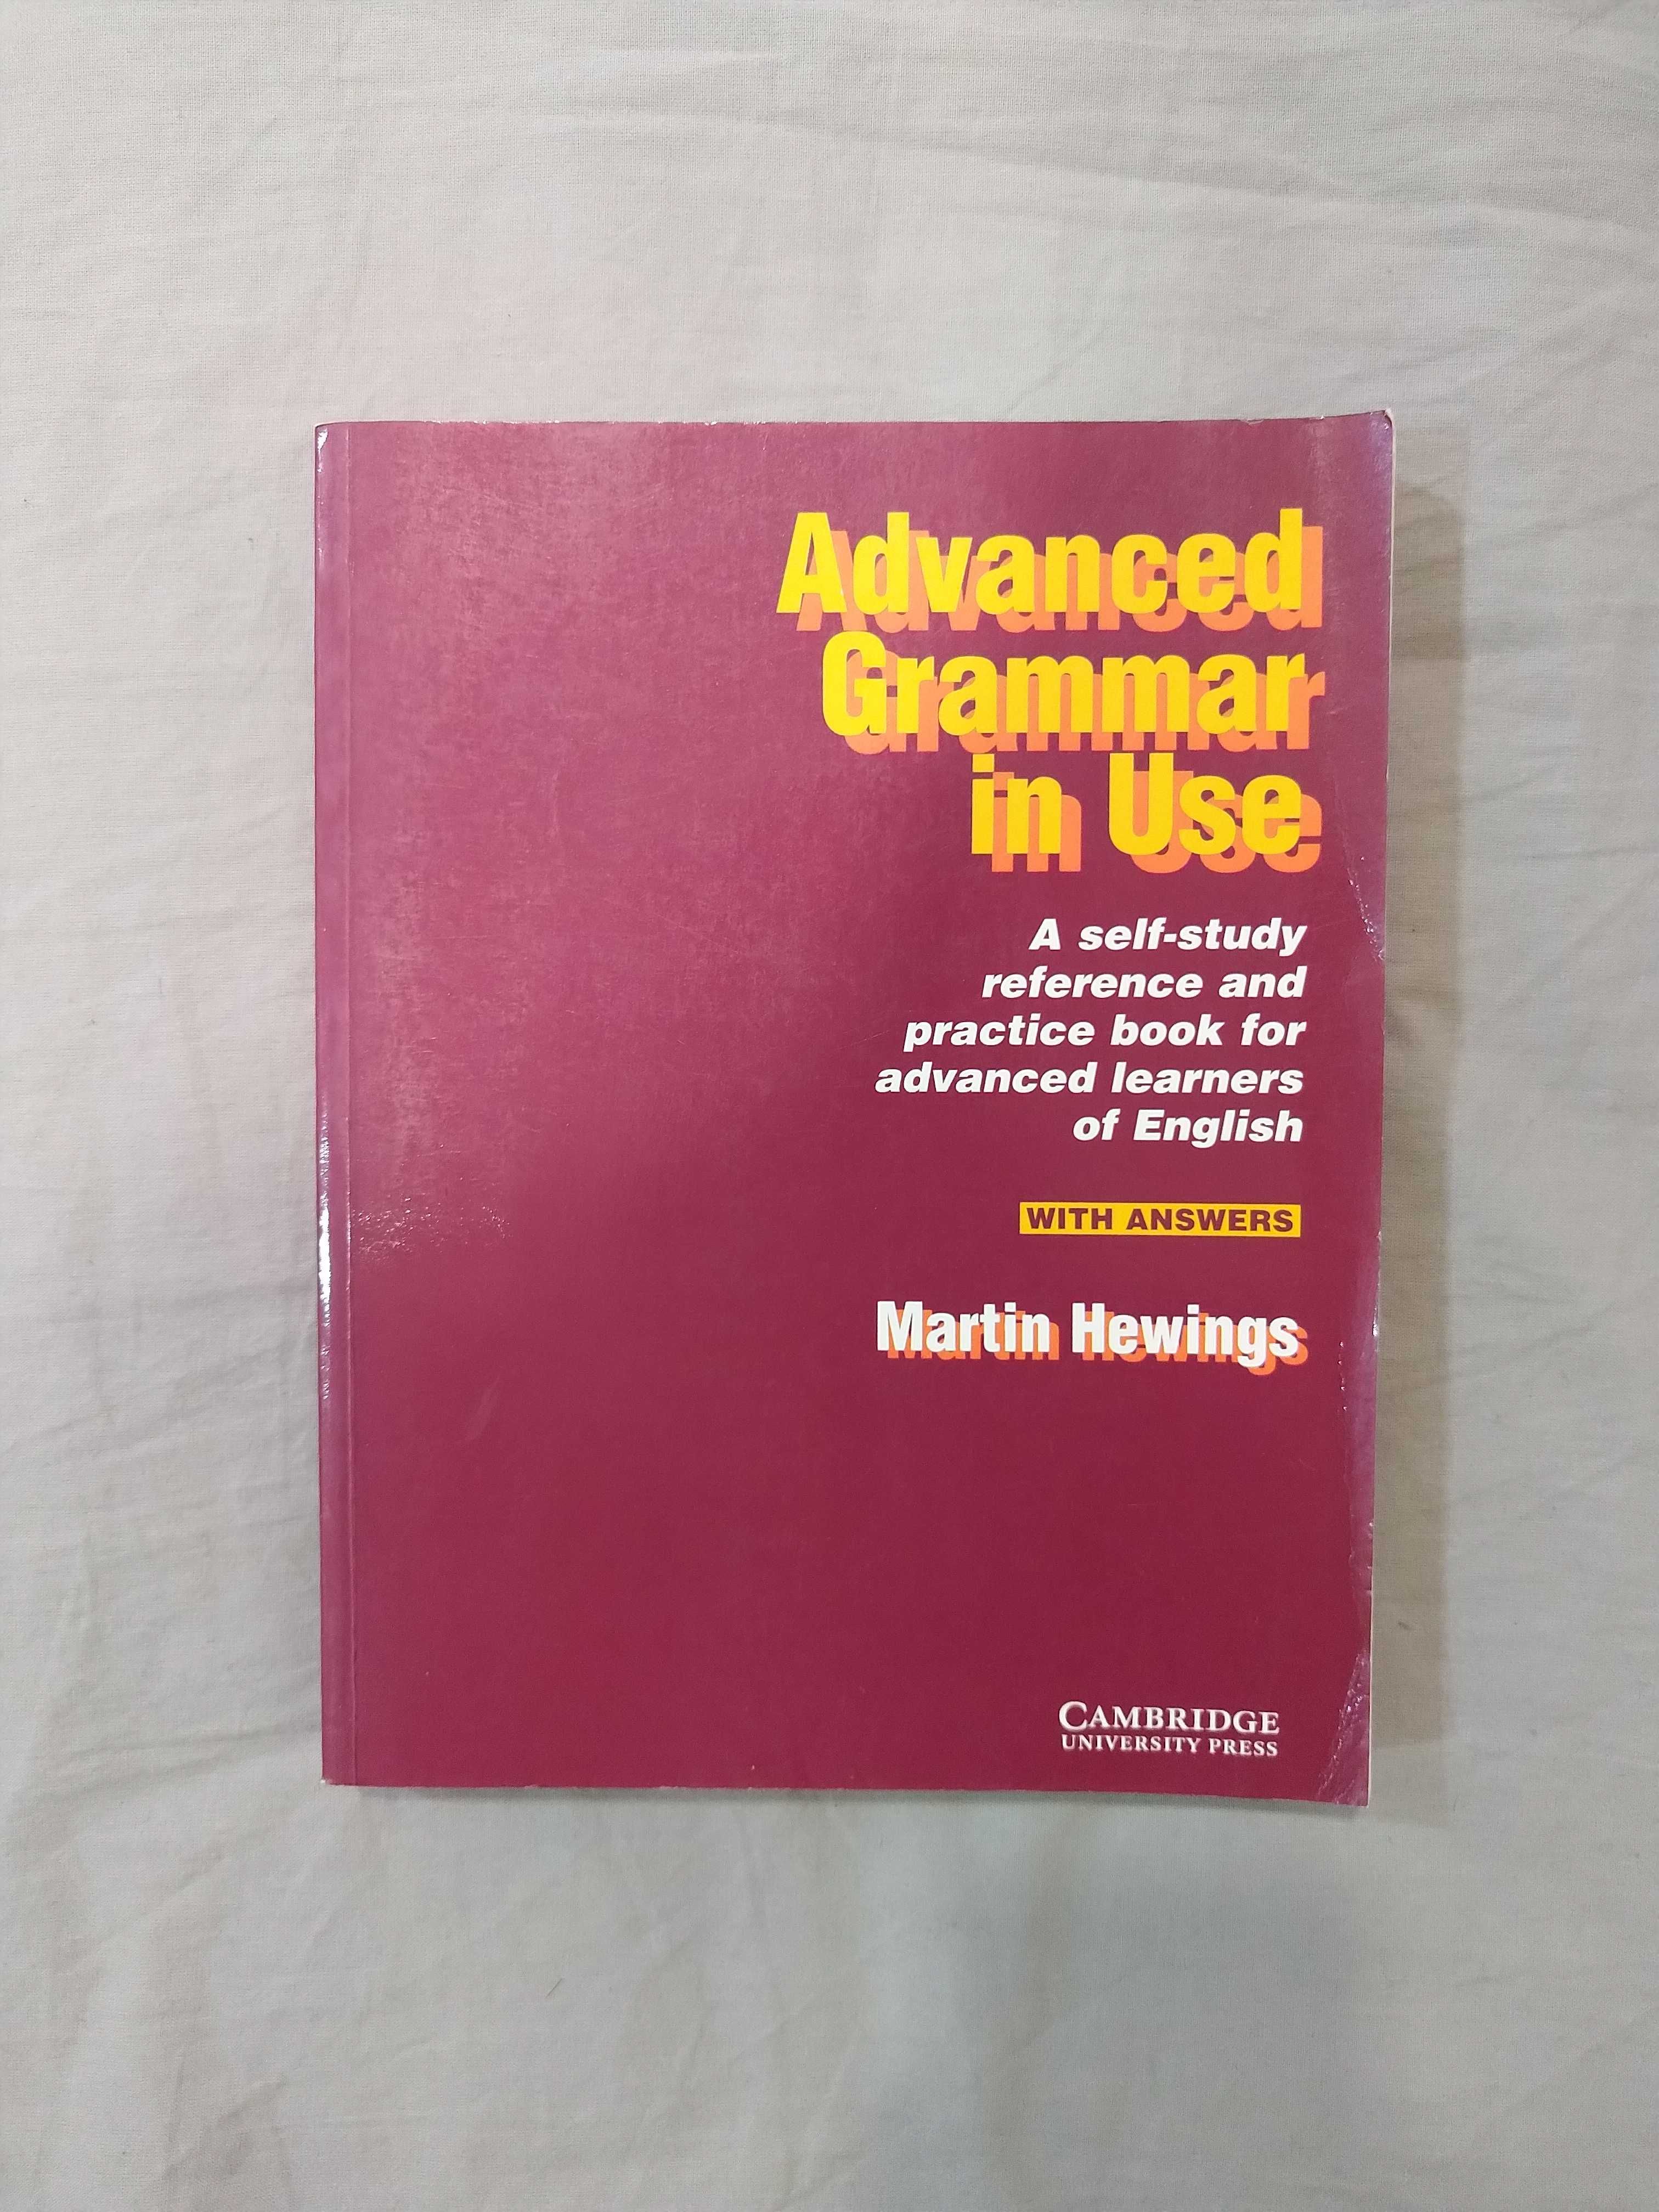 Advanced Grammar in Use with Answers (Hewings, Cambridge University)